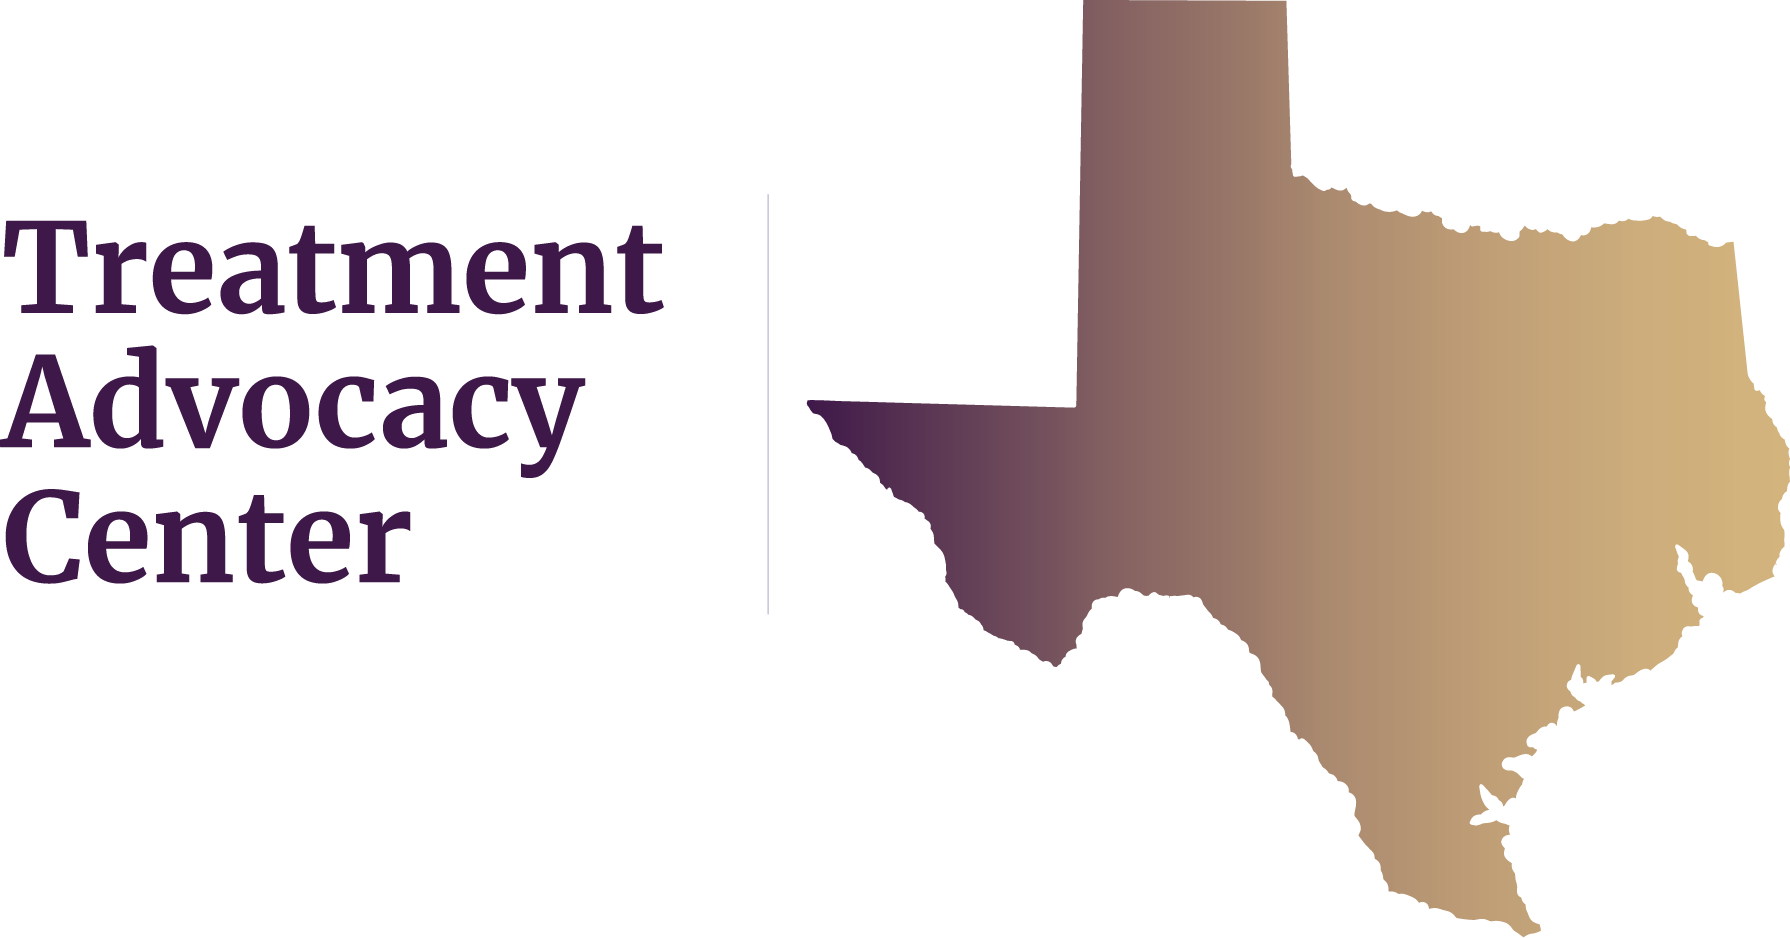 State of Texas next to Treatment Advocacy Center text, symbolizing local severe mental illness data, laws, and resources